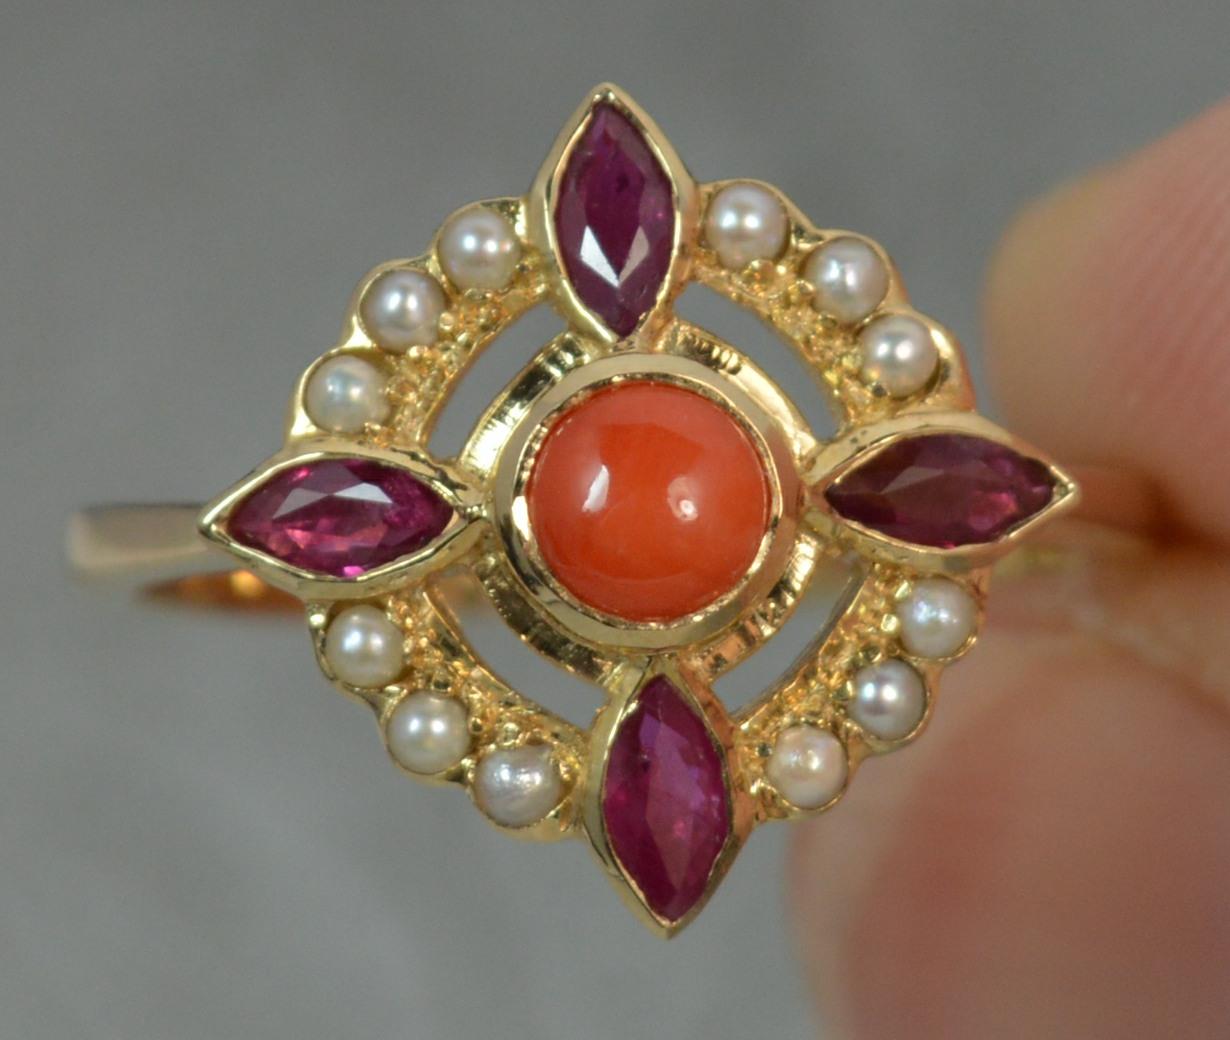 Women's Luke Stockley 9 Carat Gold Coral Pearl Ruby Flower Cluster Ring